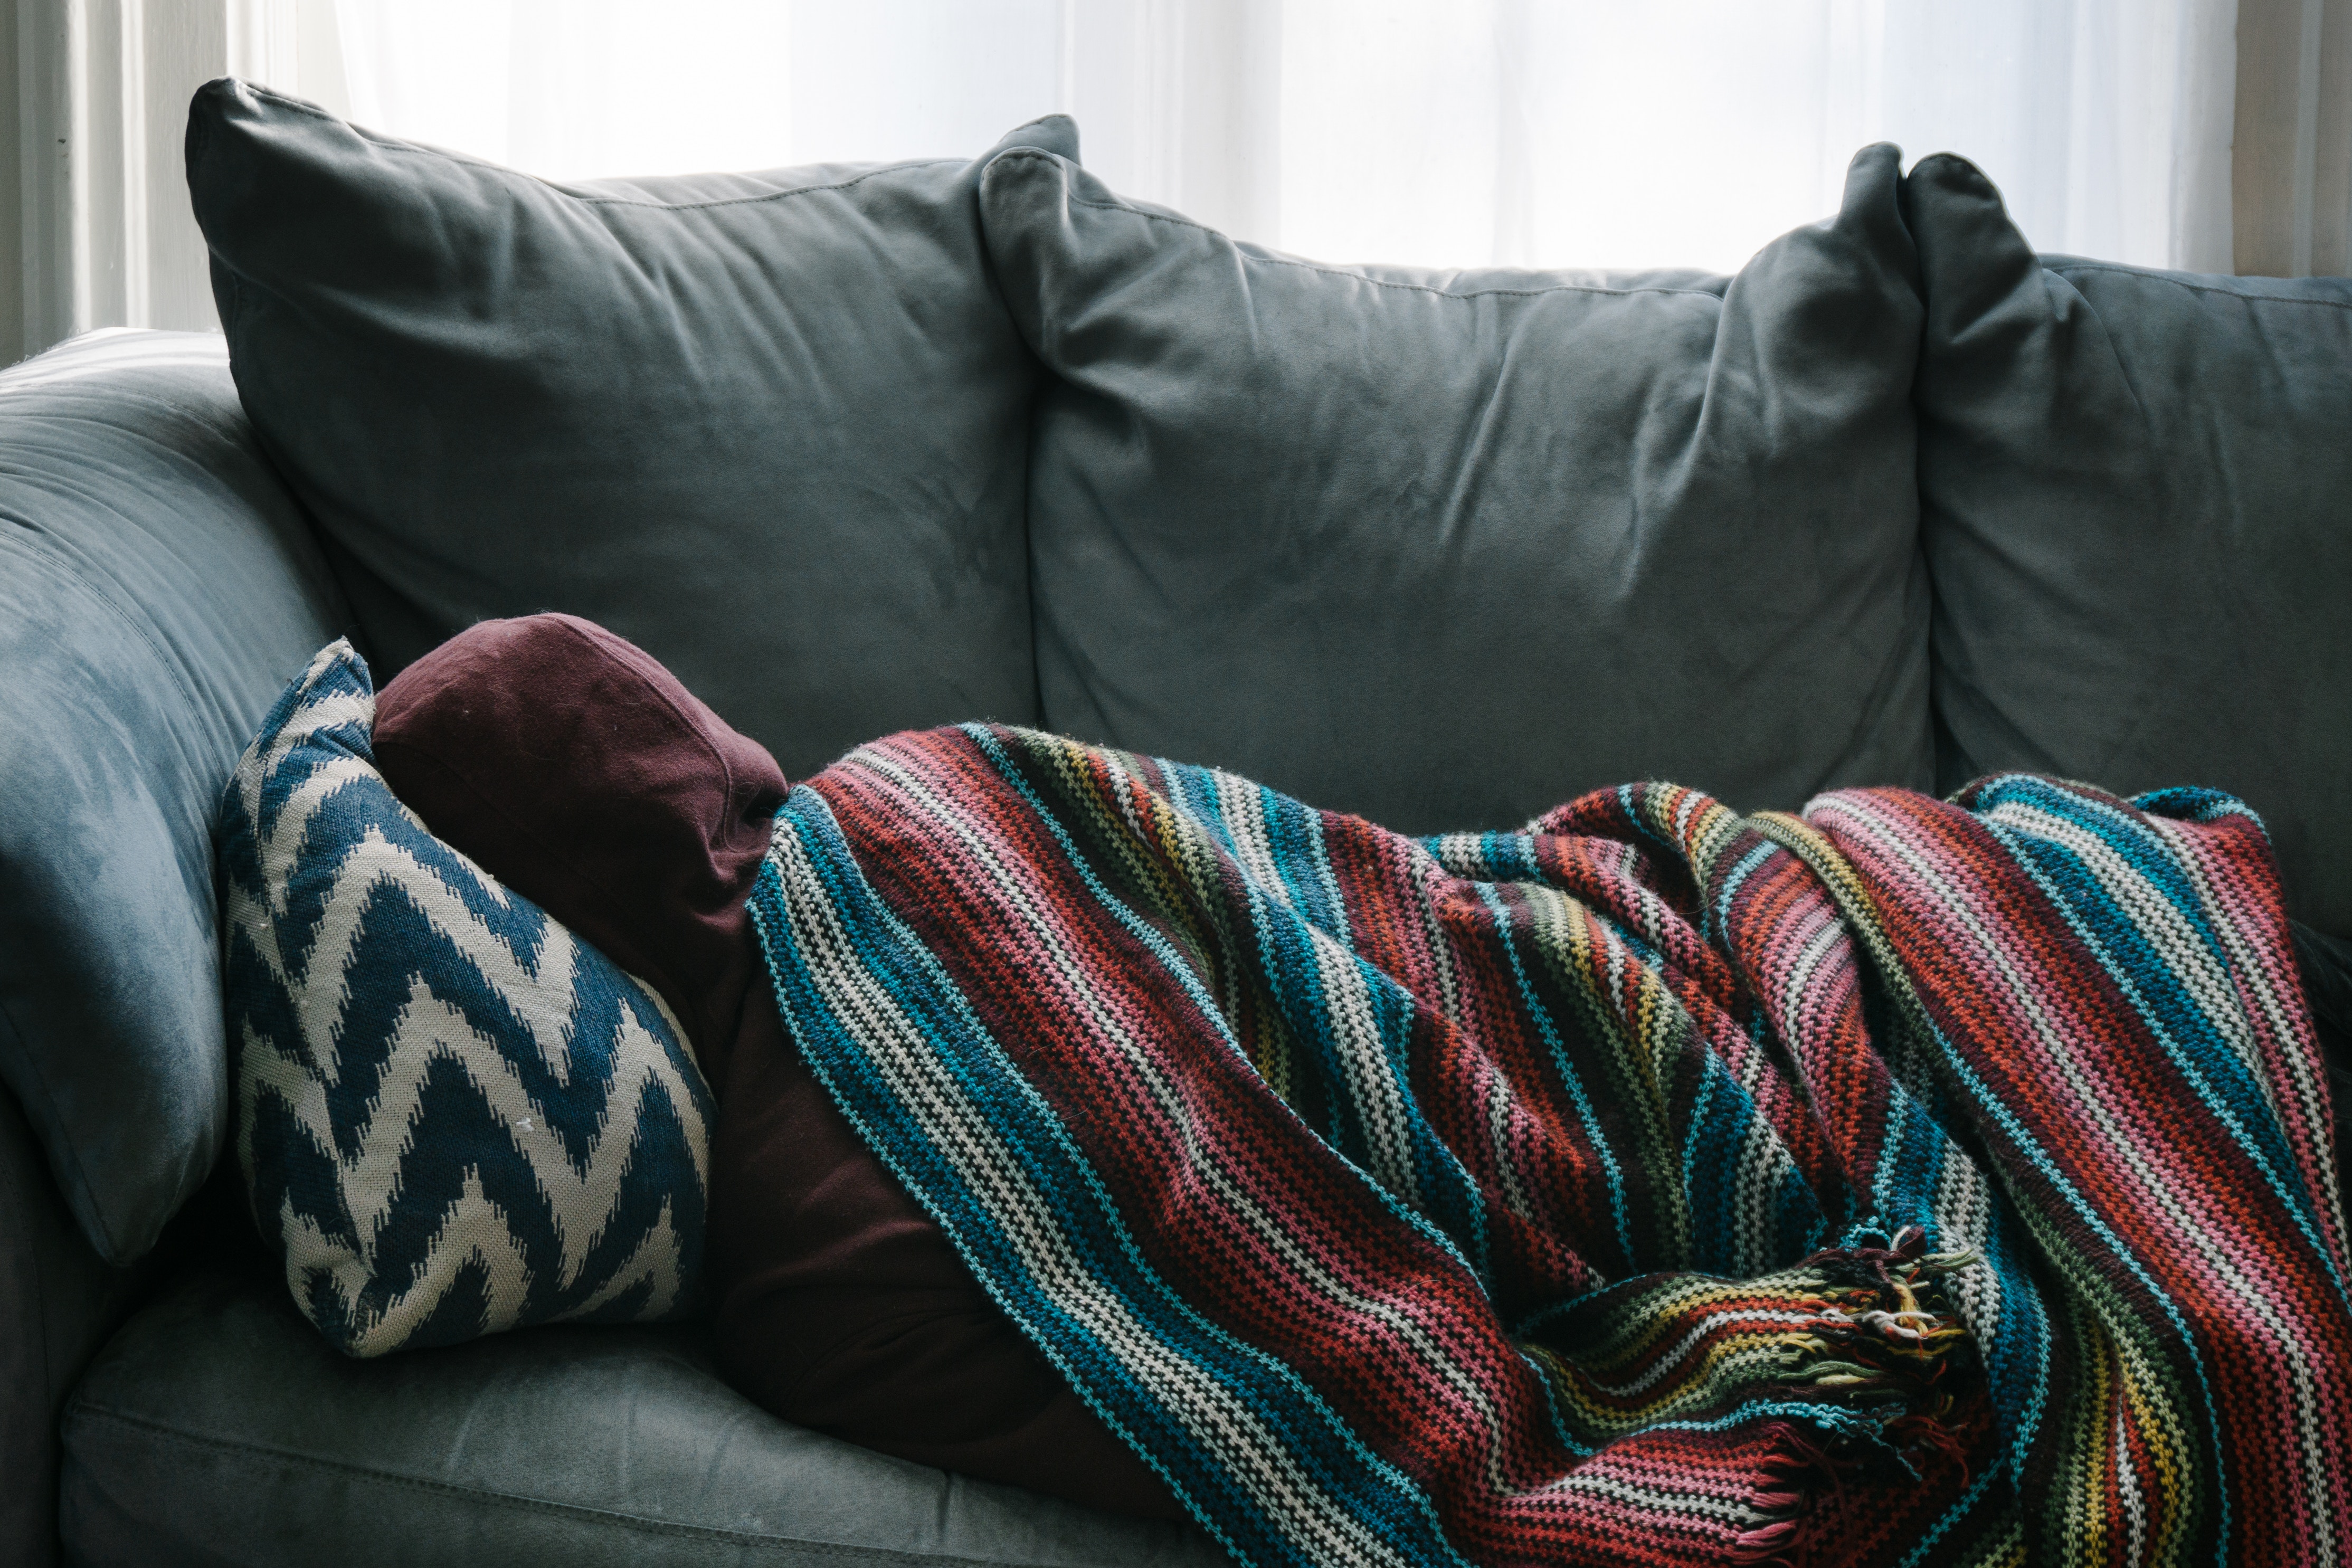 Depression, person sleeping in sofa with a hoodie and blanket